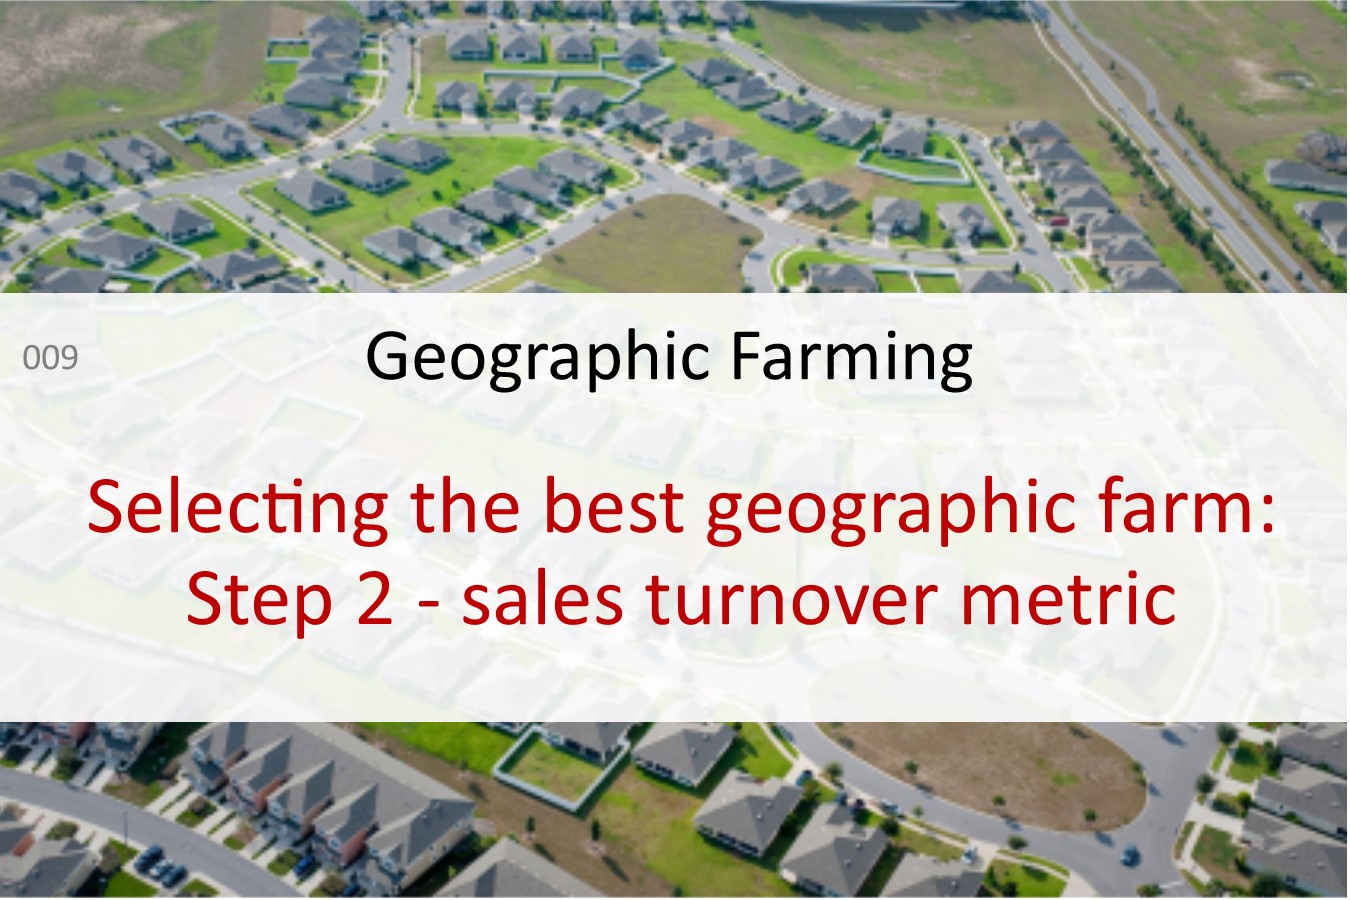 geographic farming seller leads